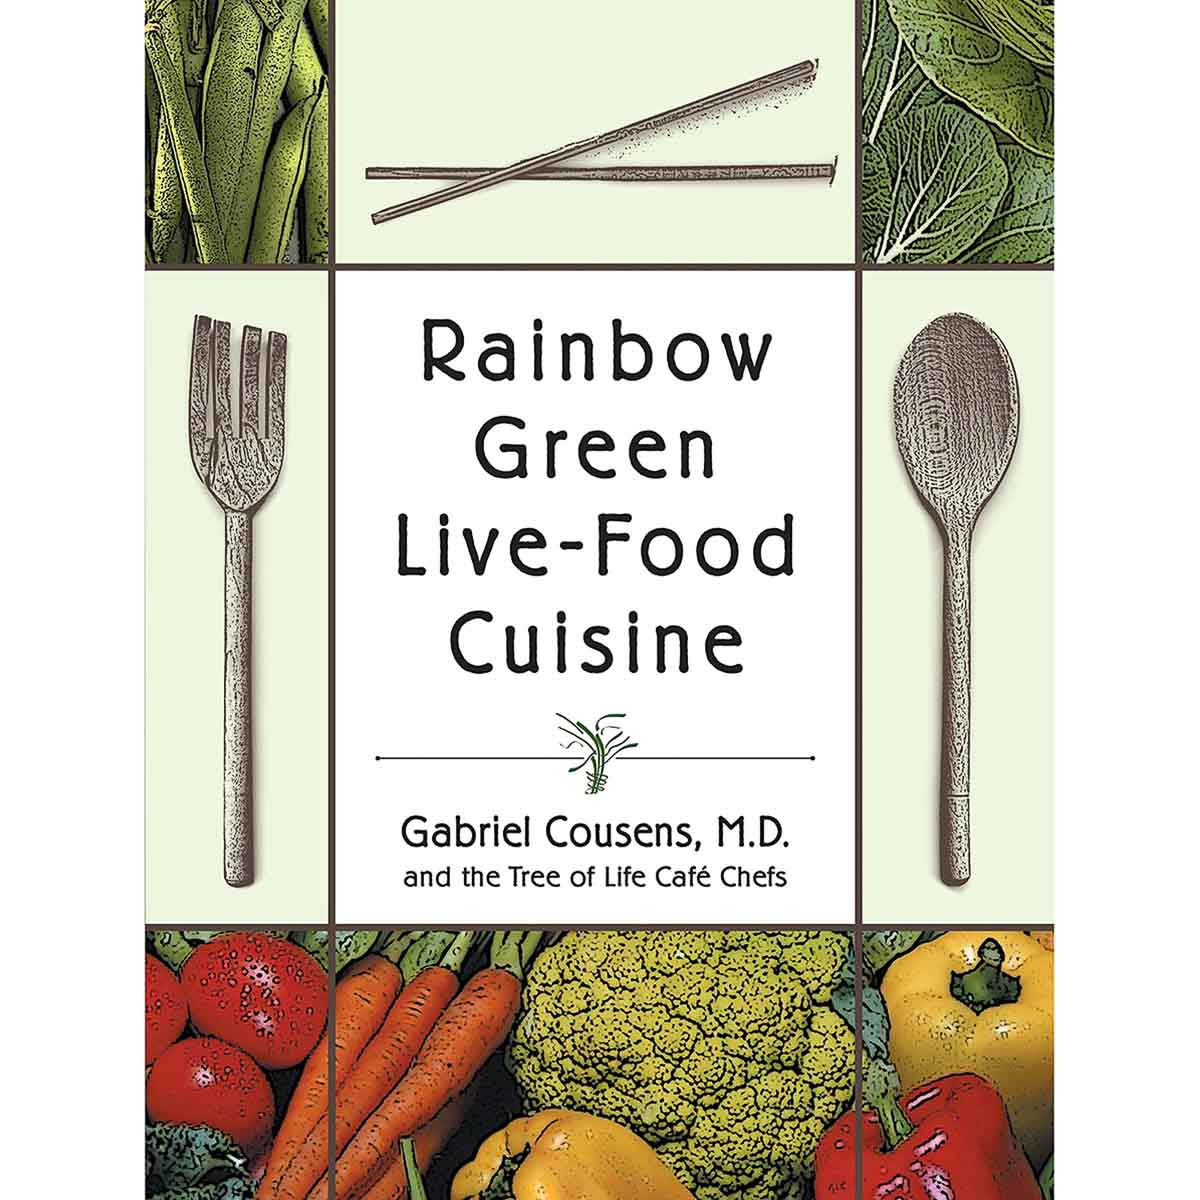 Rainbow Green Live Food Cuisine | Gabriel Cousens | Raw Living UK | Books | Rainbow Green Live Food Cuisine by Gabriel Cousens promotes a Diet of Whole, Natural, Organic, and Raw foods for Good Health.